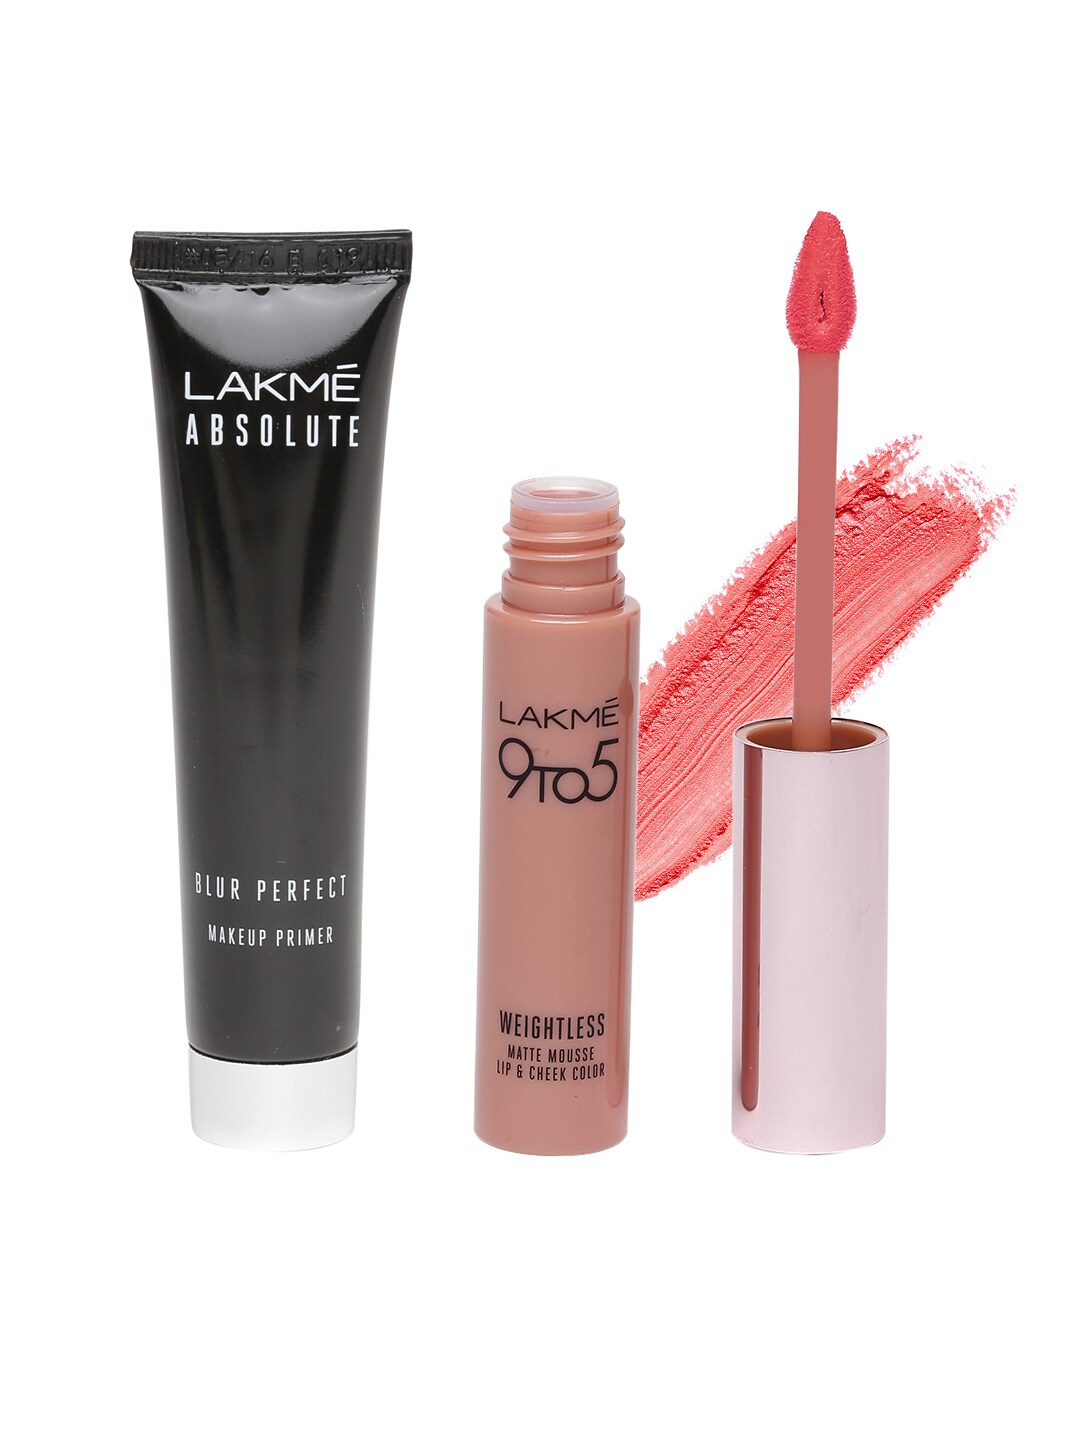 Lakme Set of Absolute Blur Perfect Primer & Weightless Matte Pink Plush Lip & Cheek Color Price in India